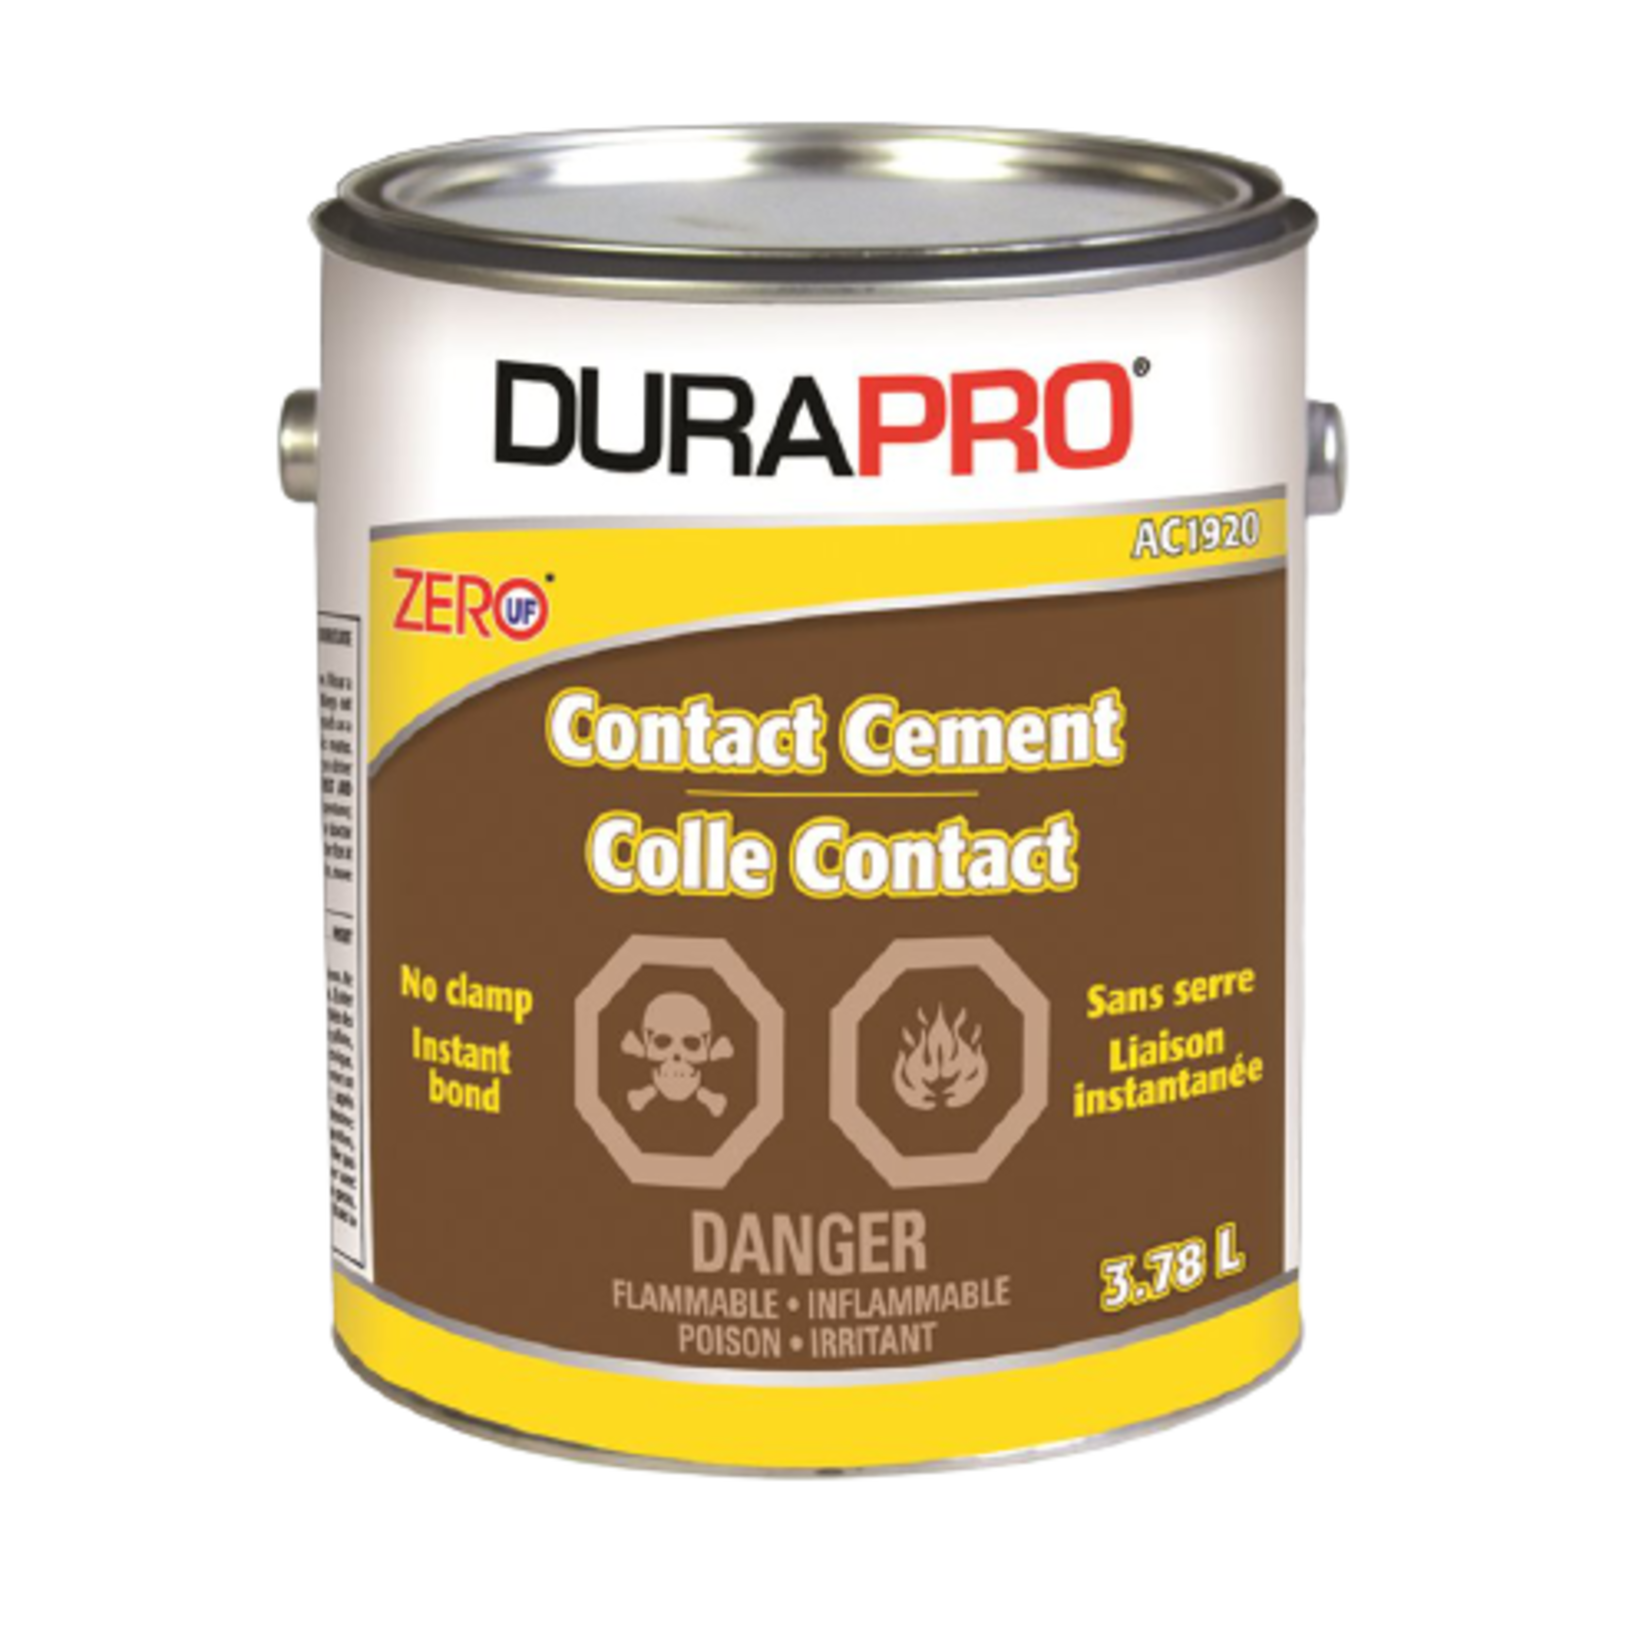 CONTACT CEMENT 3.78L